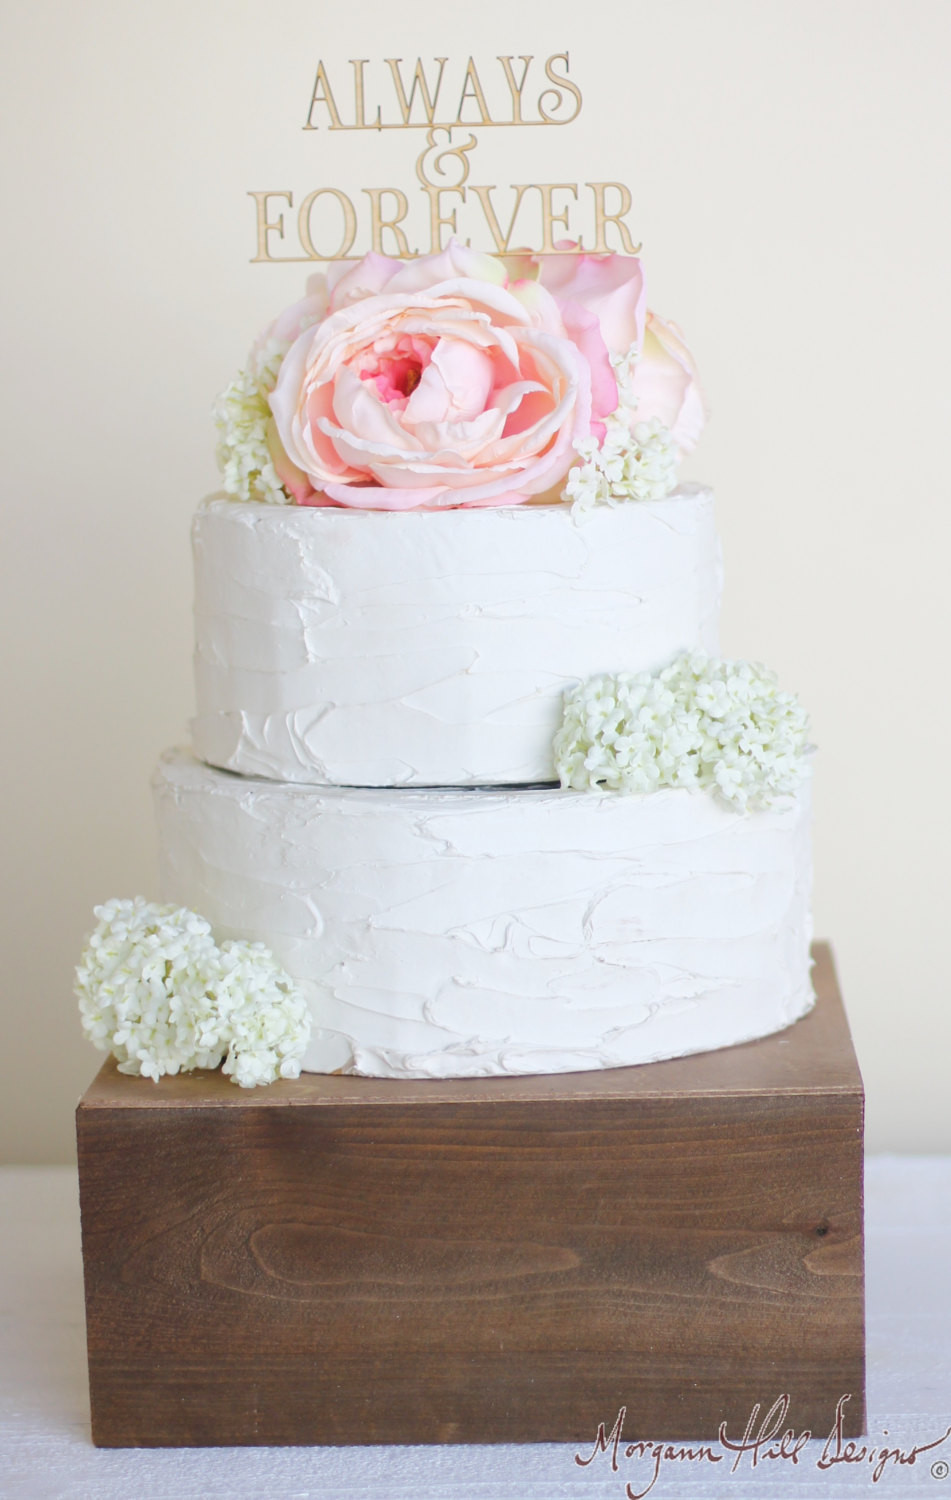 Country Wedding Cake Toppers
 27 of the Cutest Wedding Cake Toppers You ll Ever See